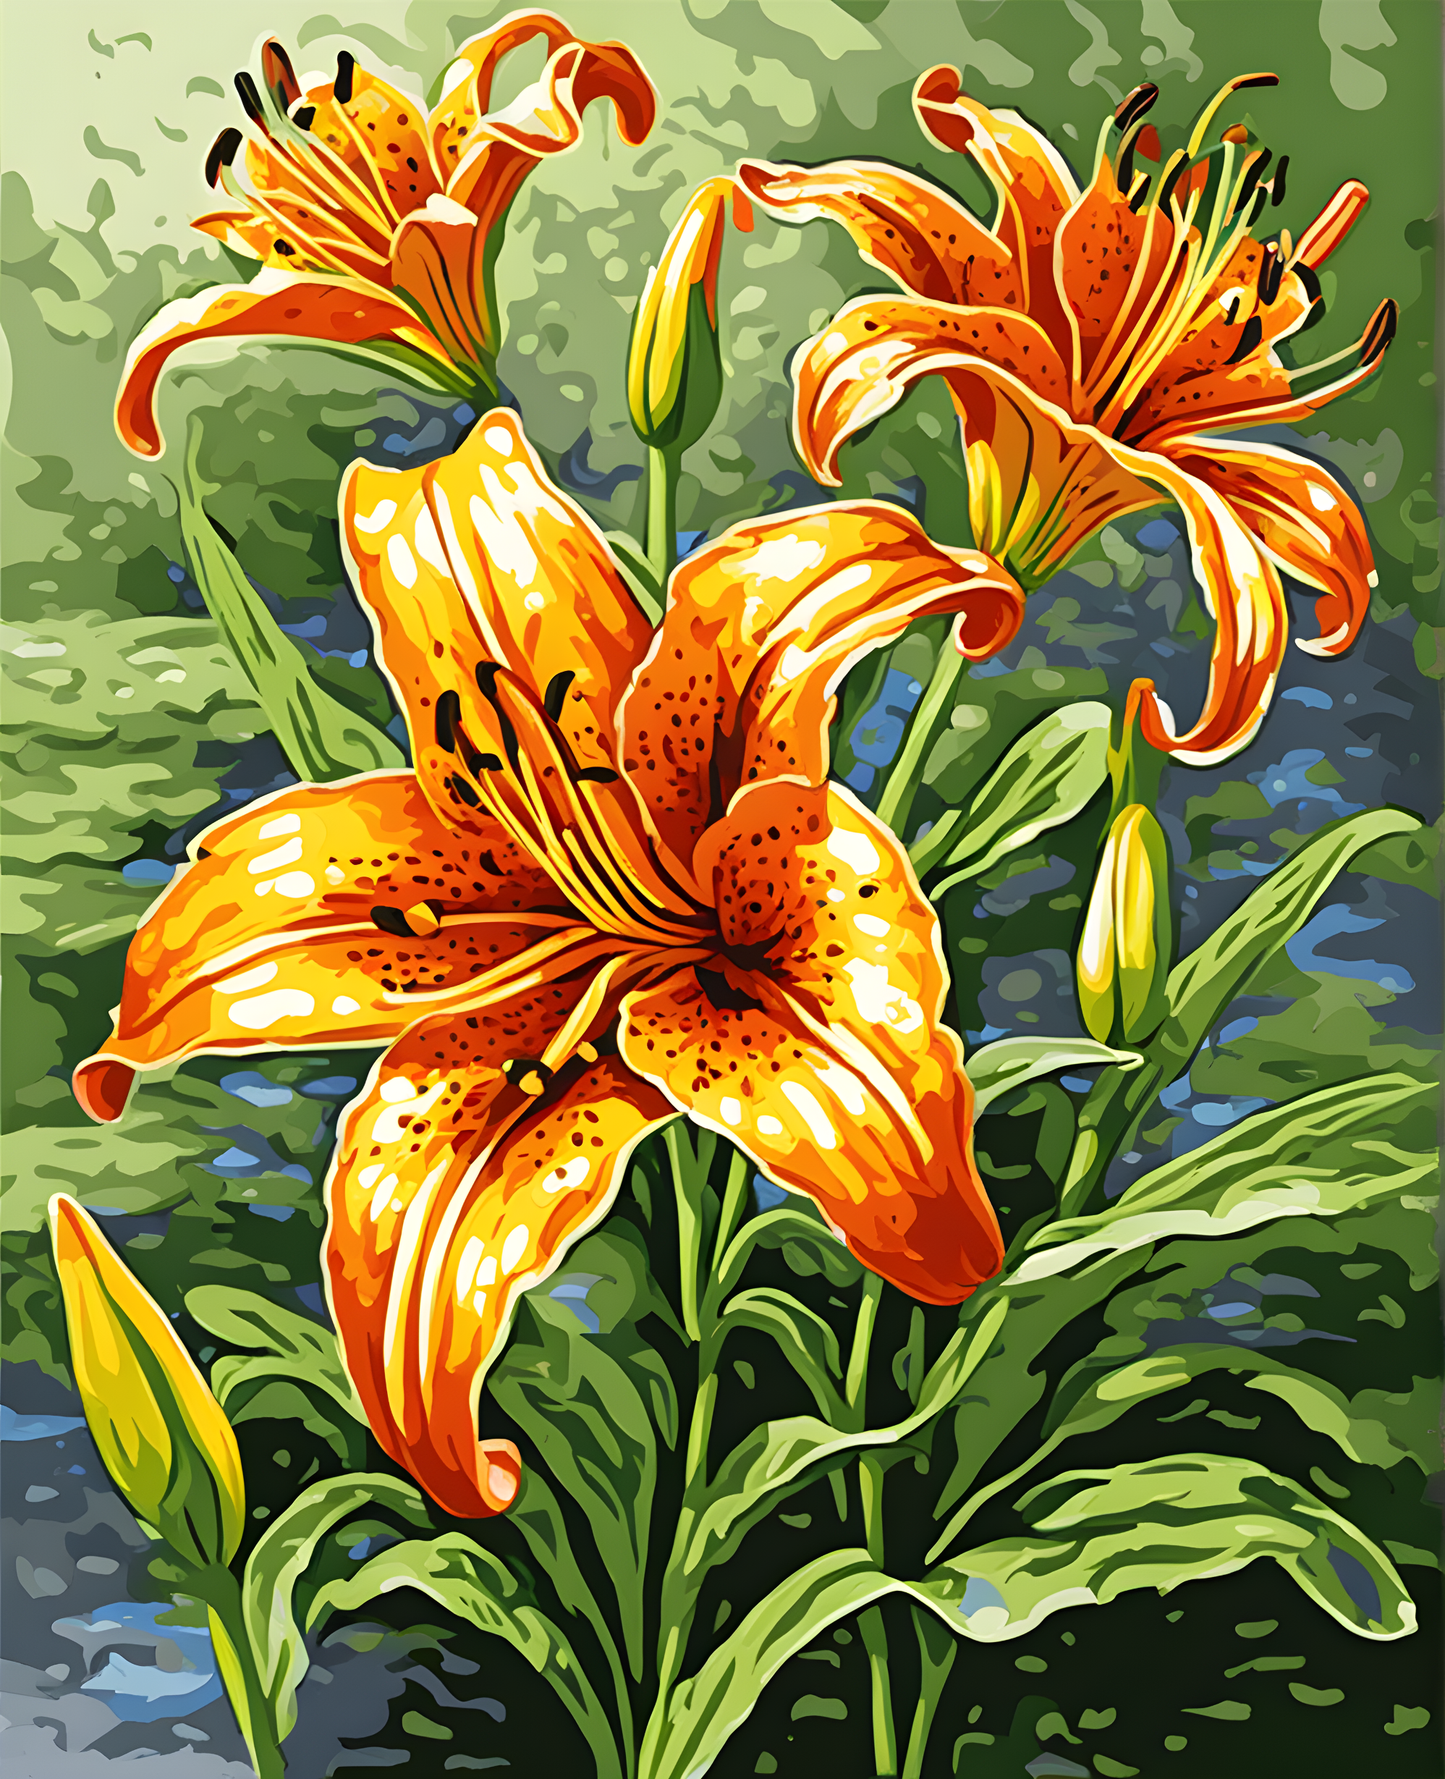 Flowers Collection OD (36) - Tiger Lily - Van-Go Paint-By-Number Kit